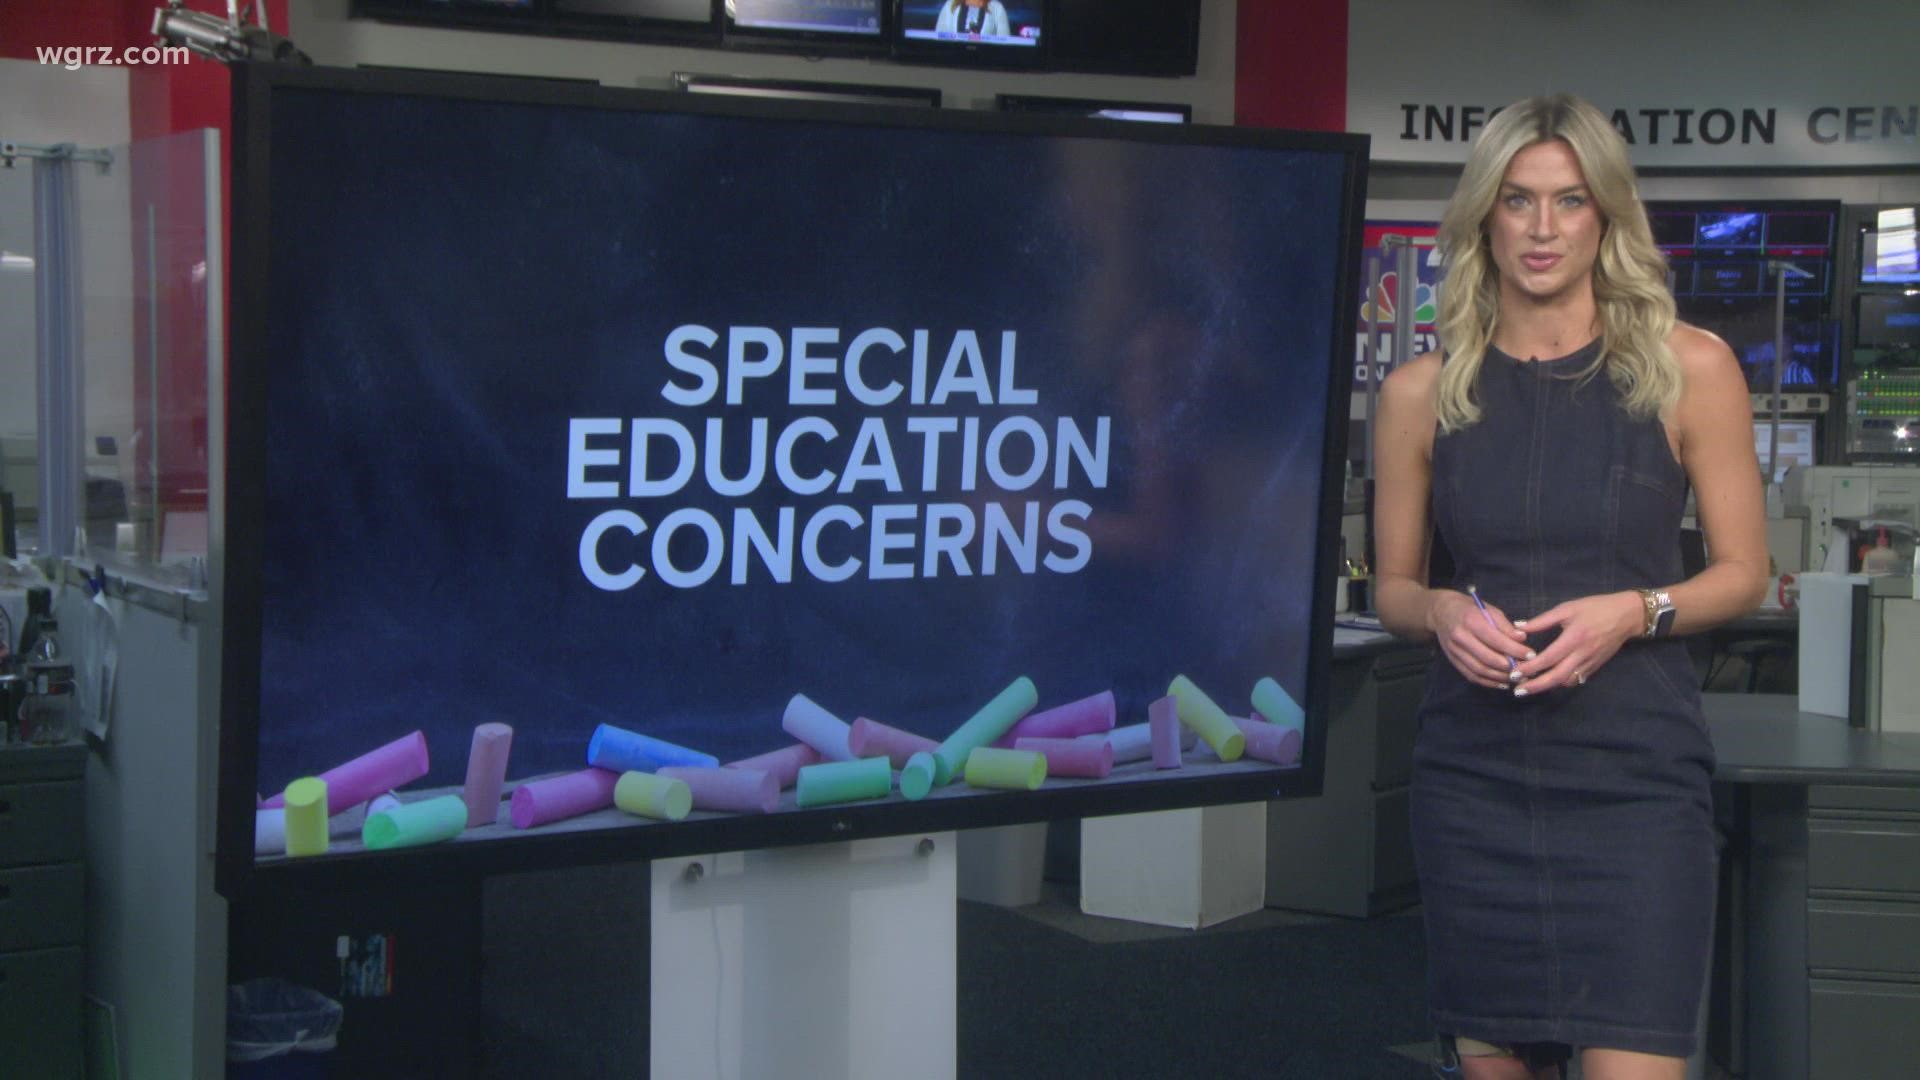 Some school administrators are concerned about a potential strain on special education resources coming out of the pandemic.